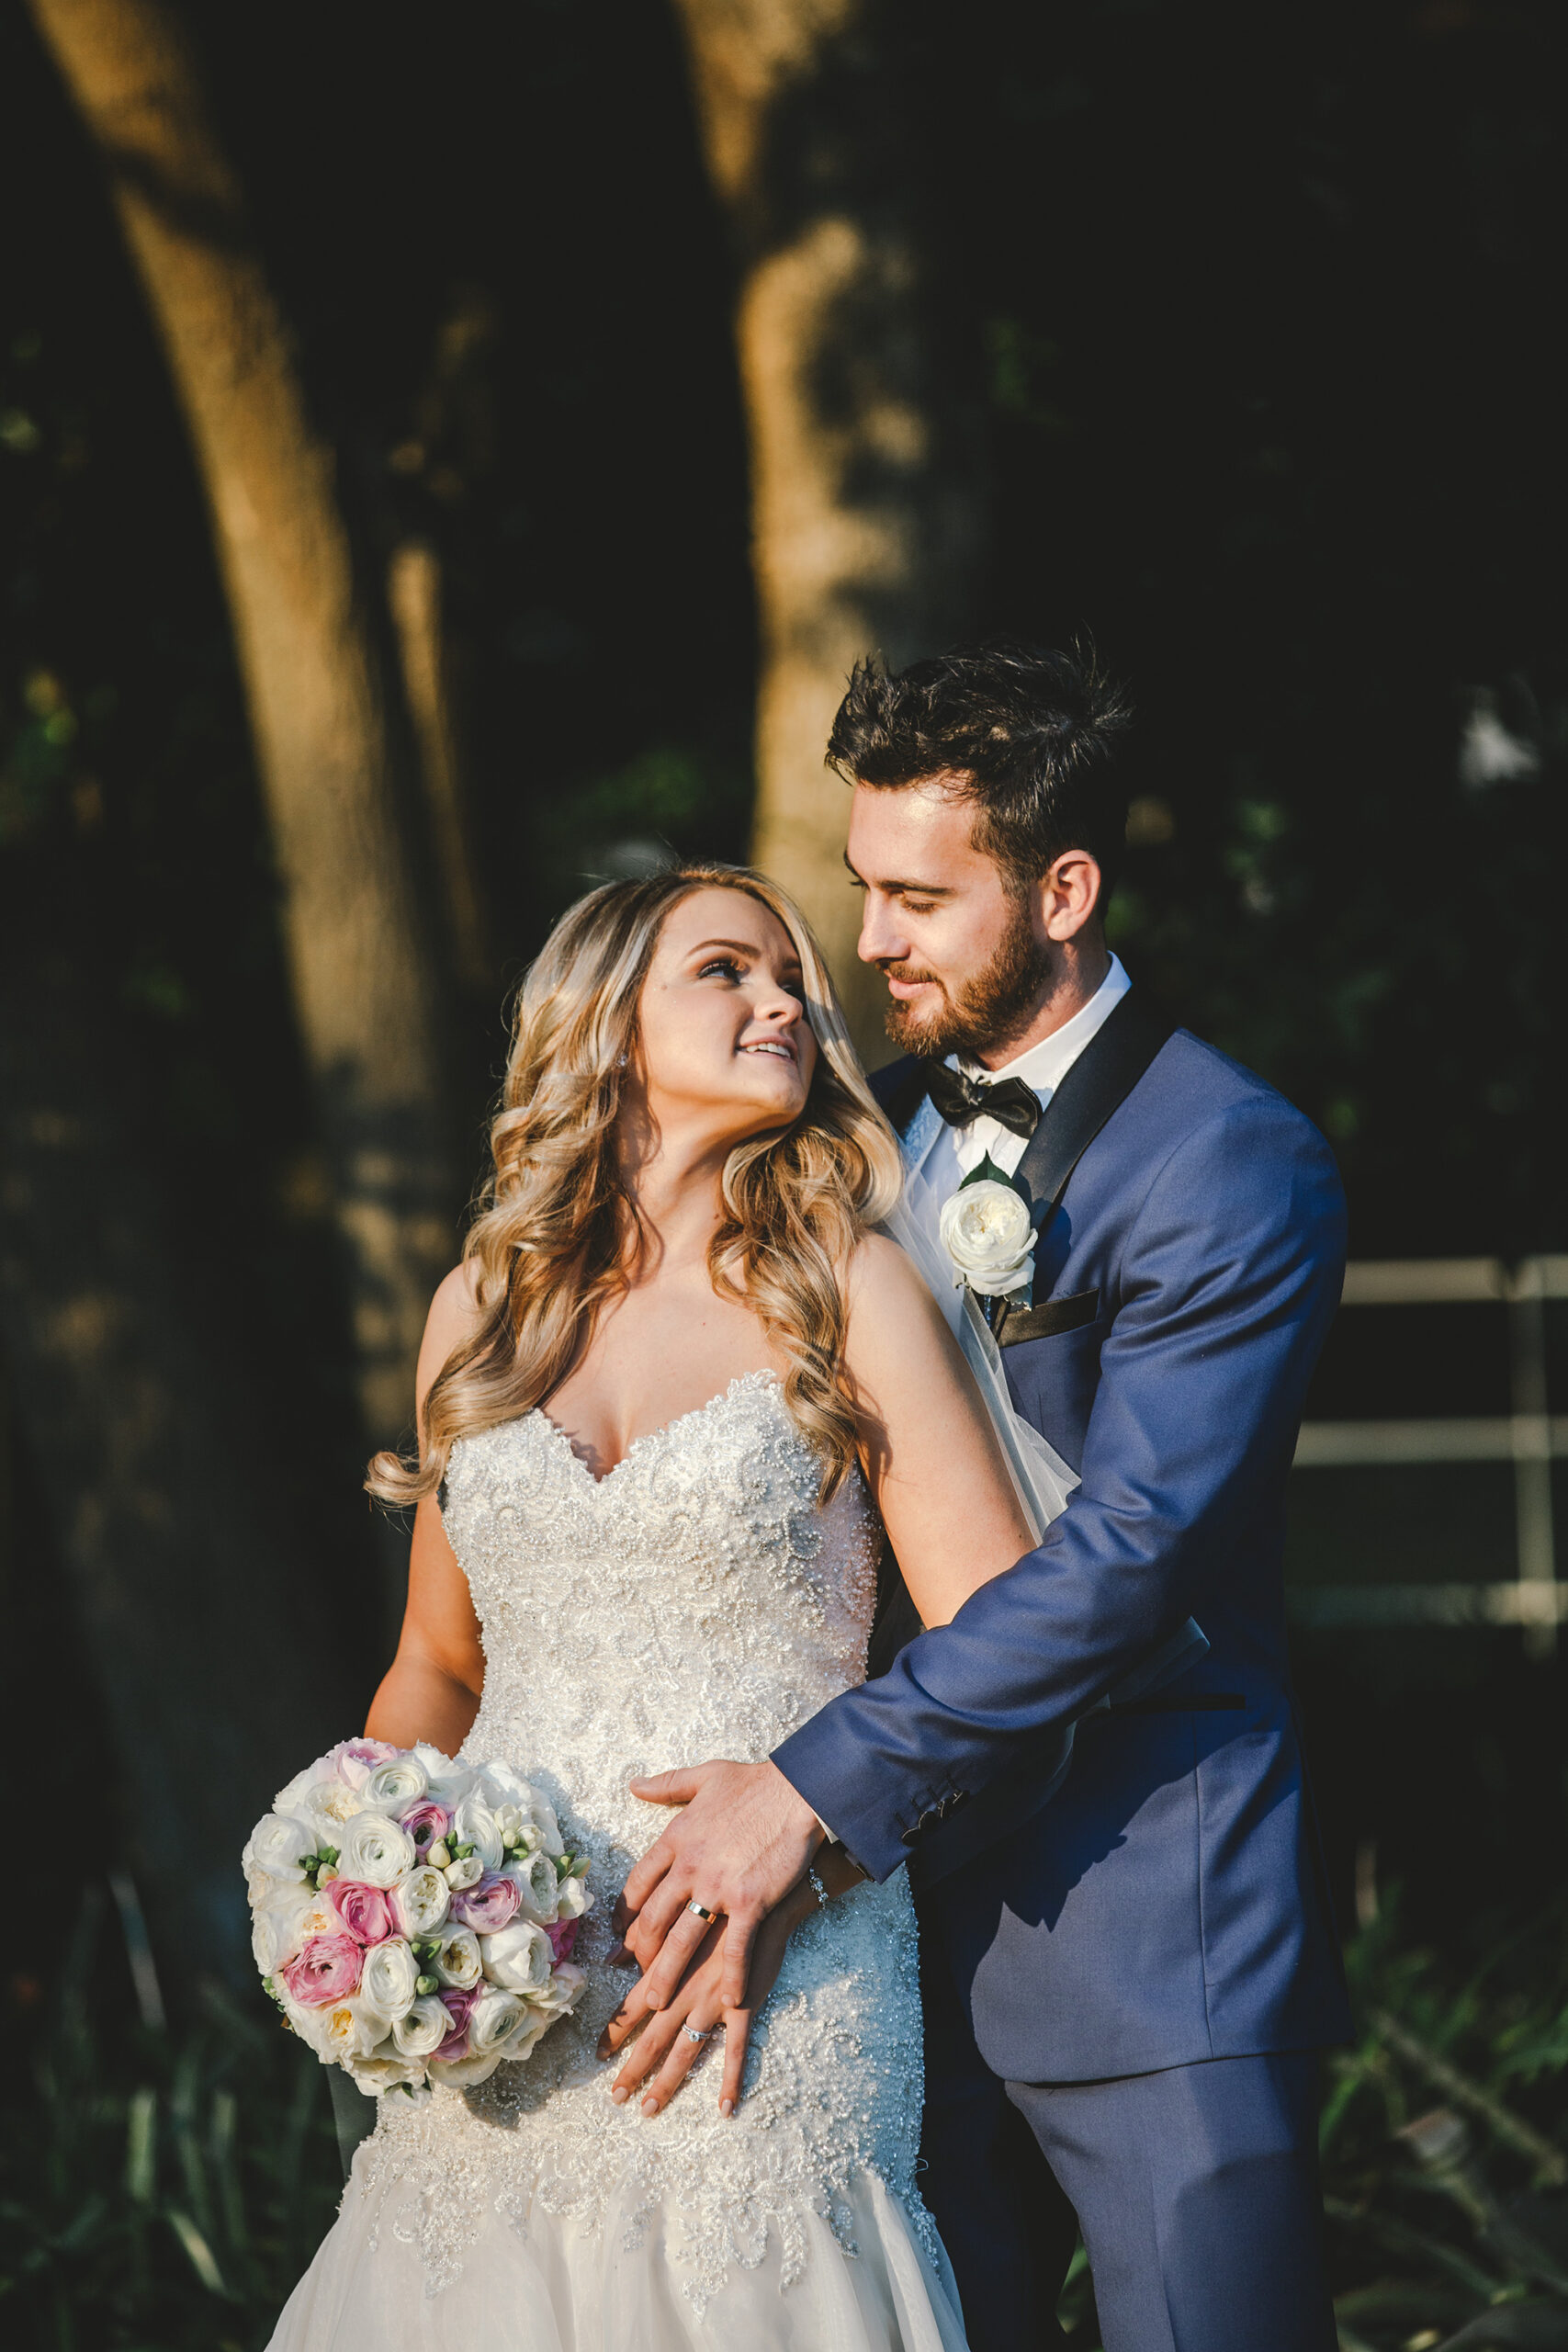 Camille_James_Rustic-Glam-Wedding_Pure-Image-Photography_SBS_005